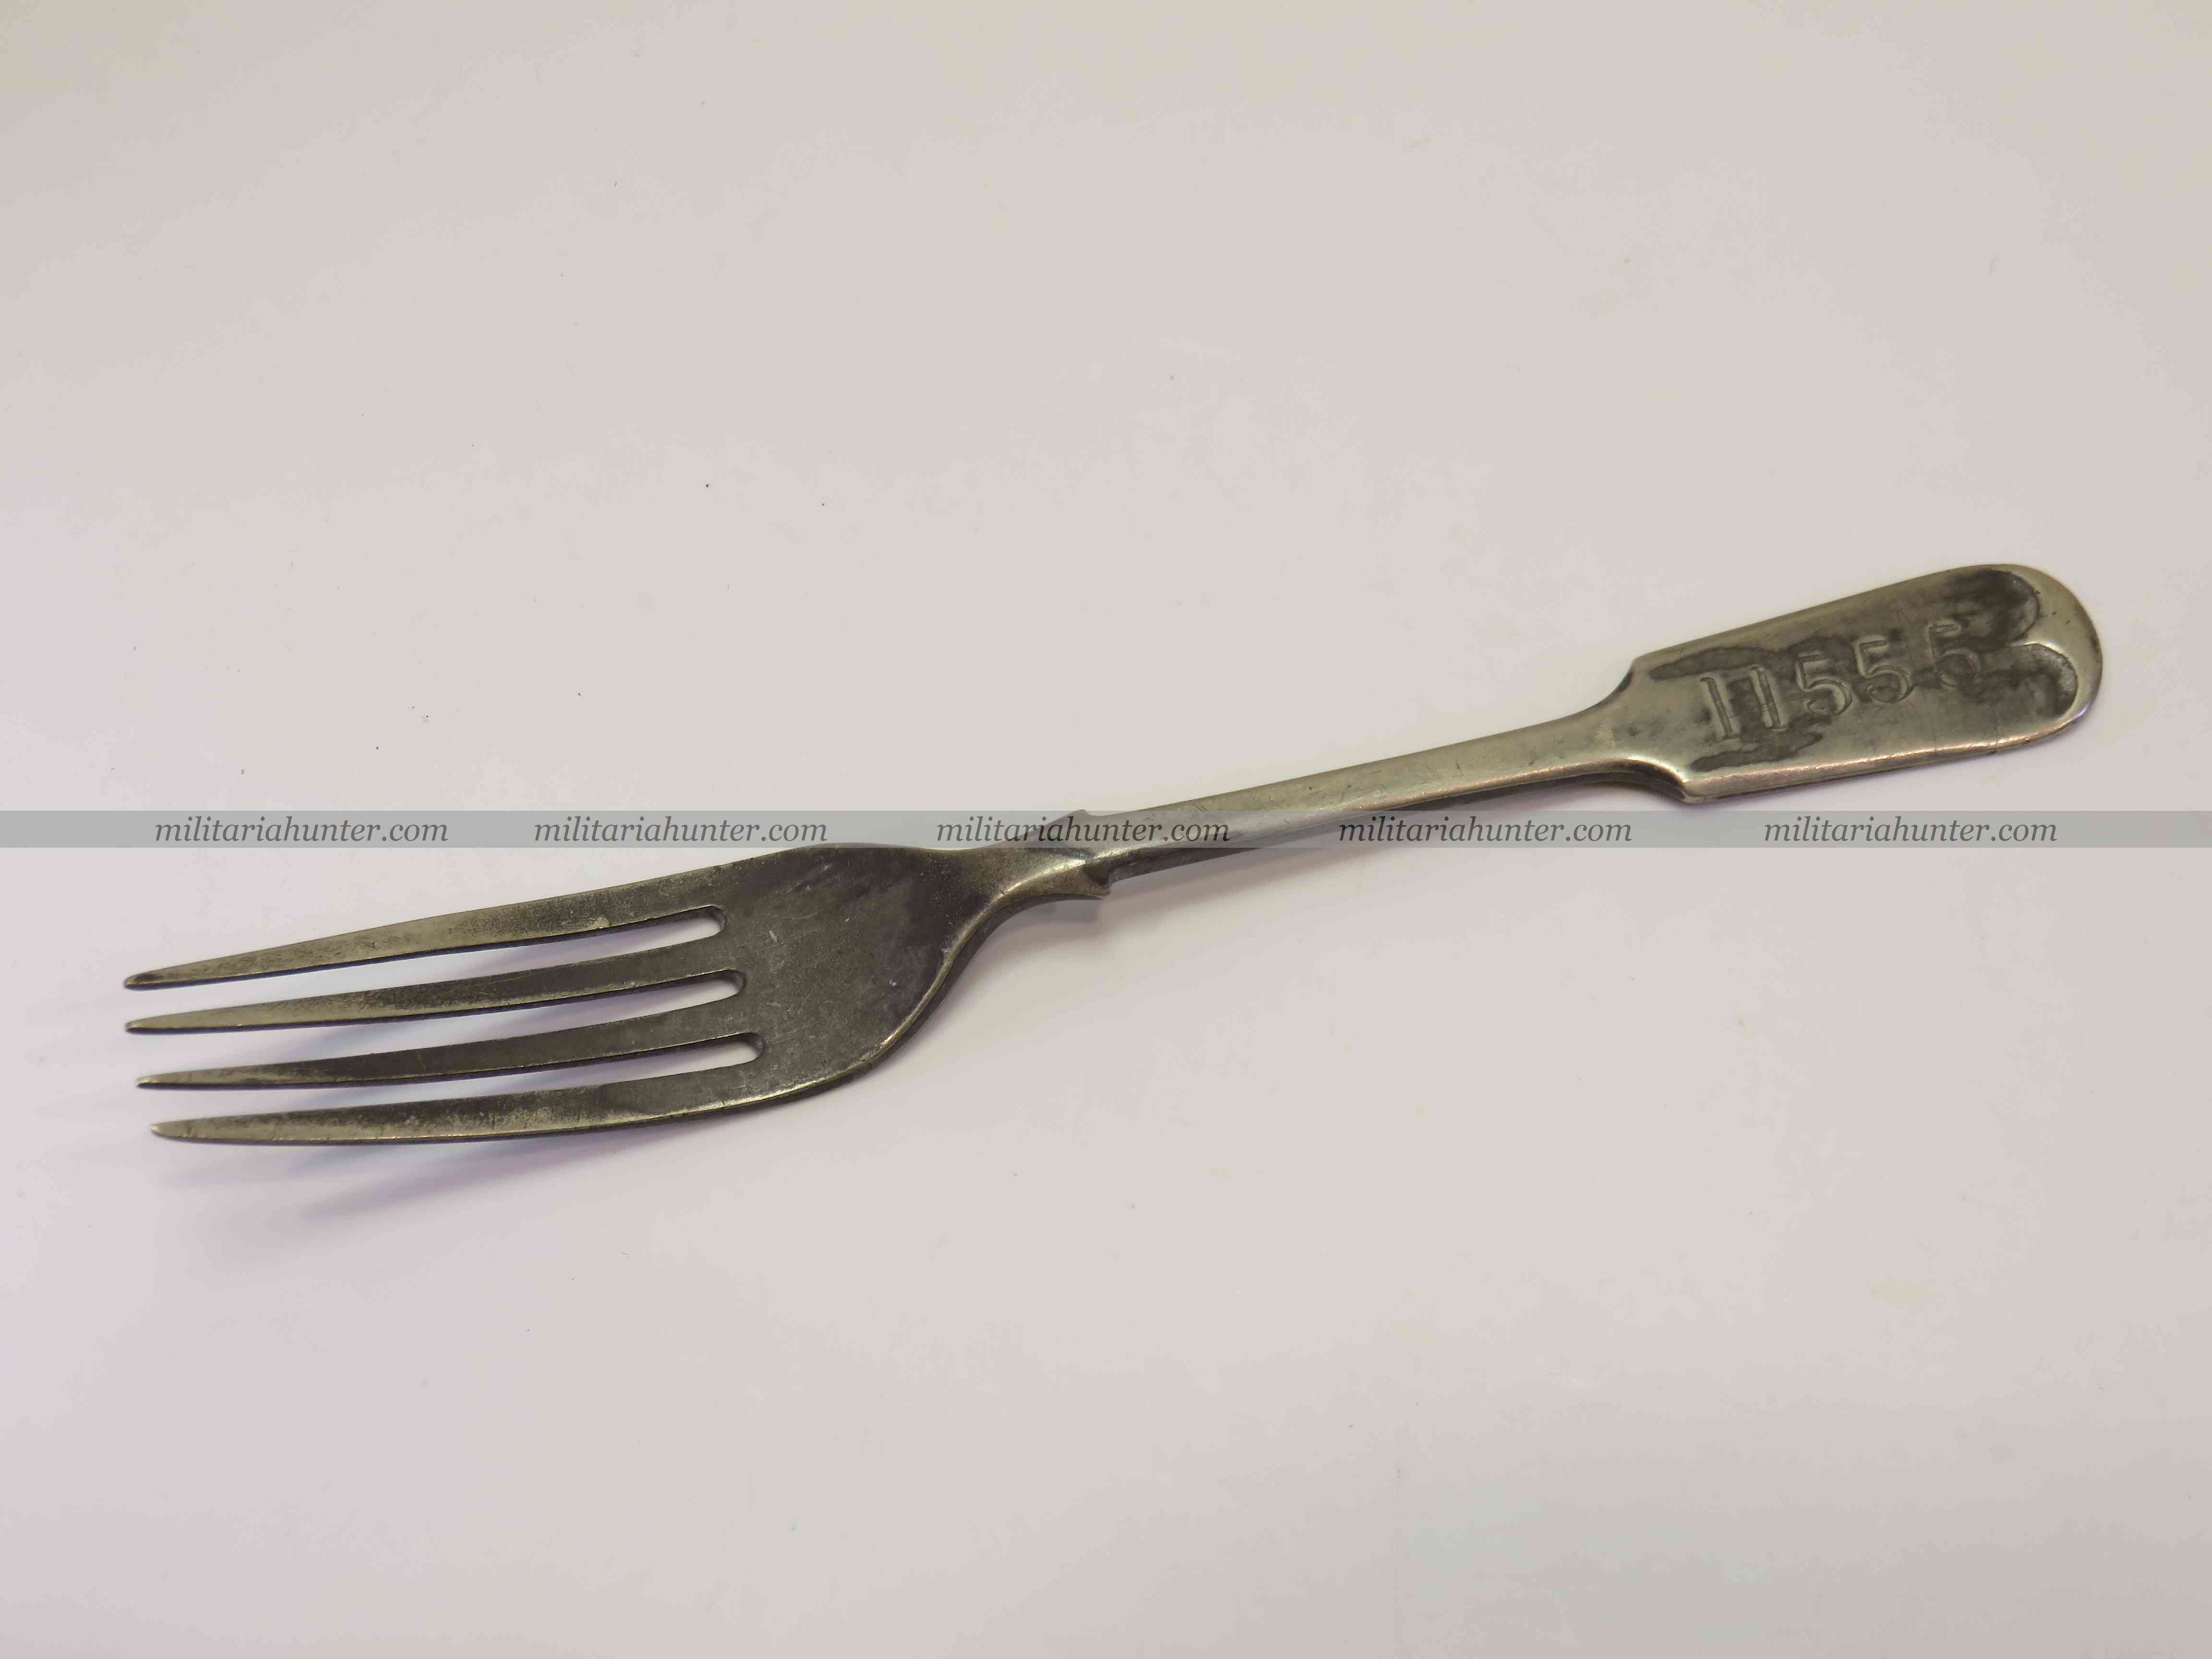 militaria : WW1 british fork with regimental number - fourchette anglaise matriculée